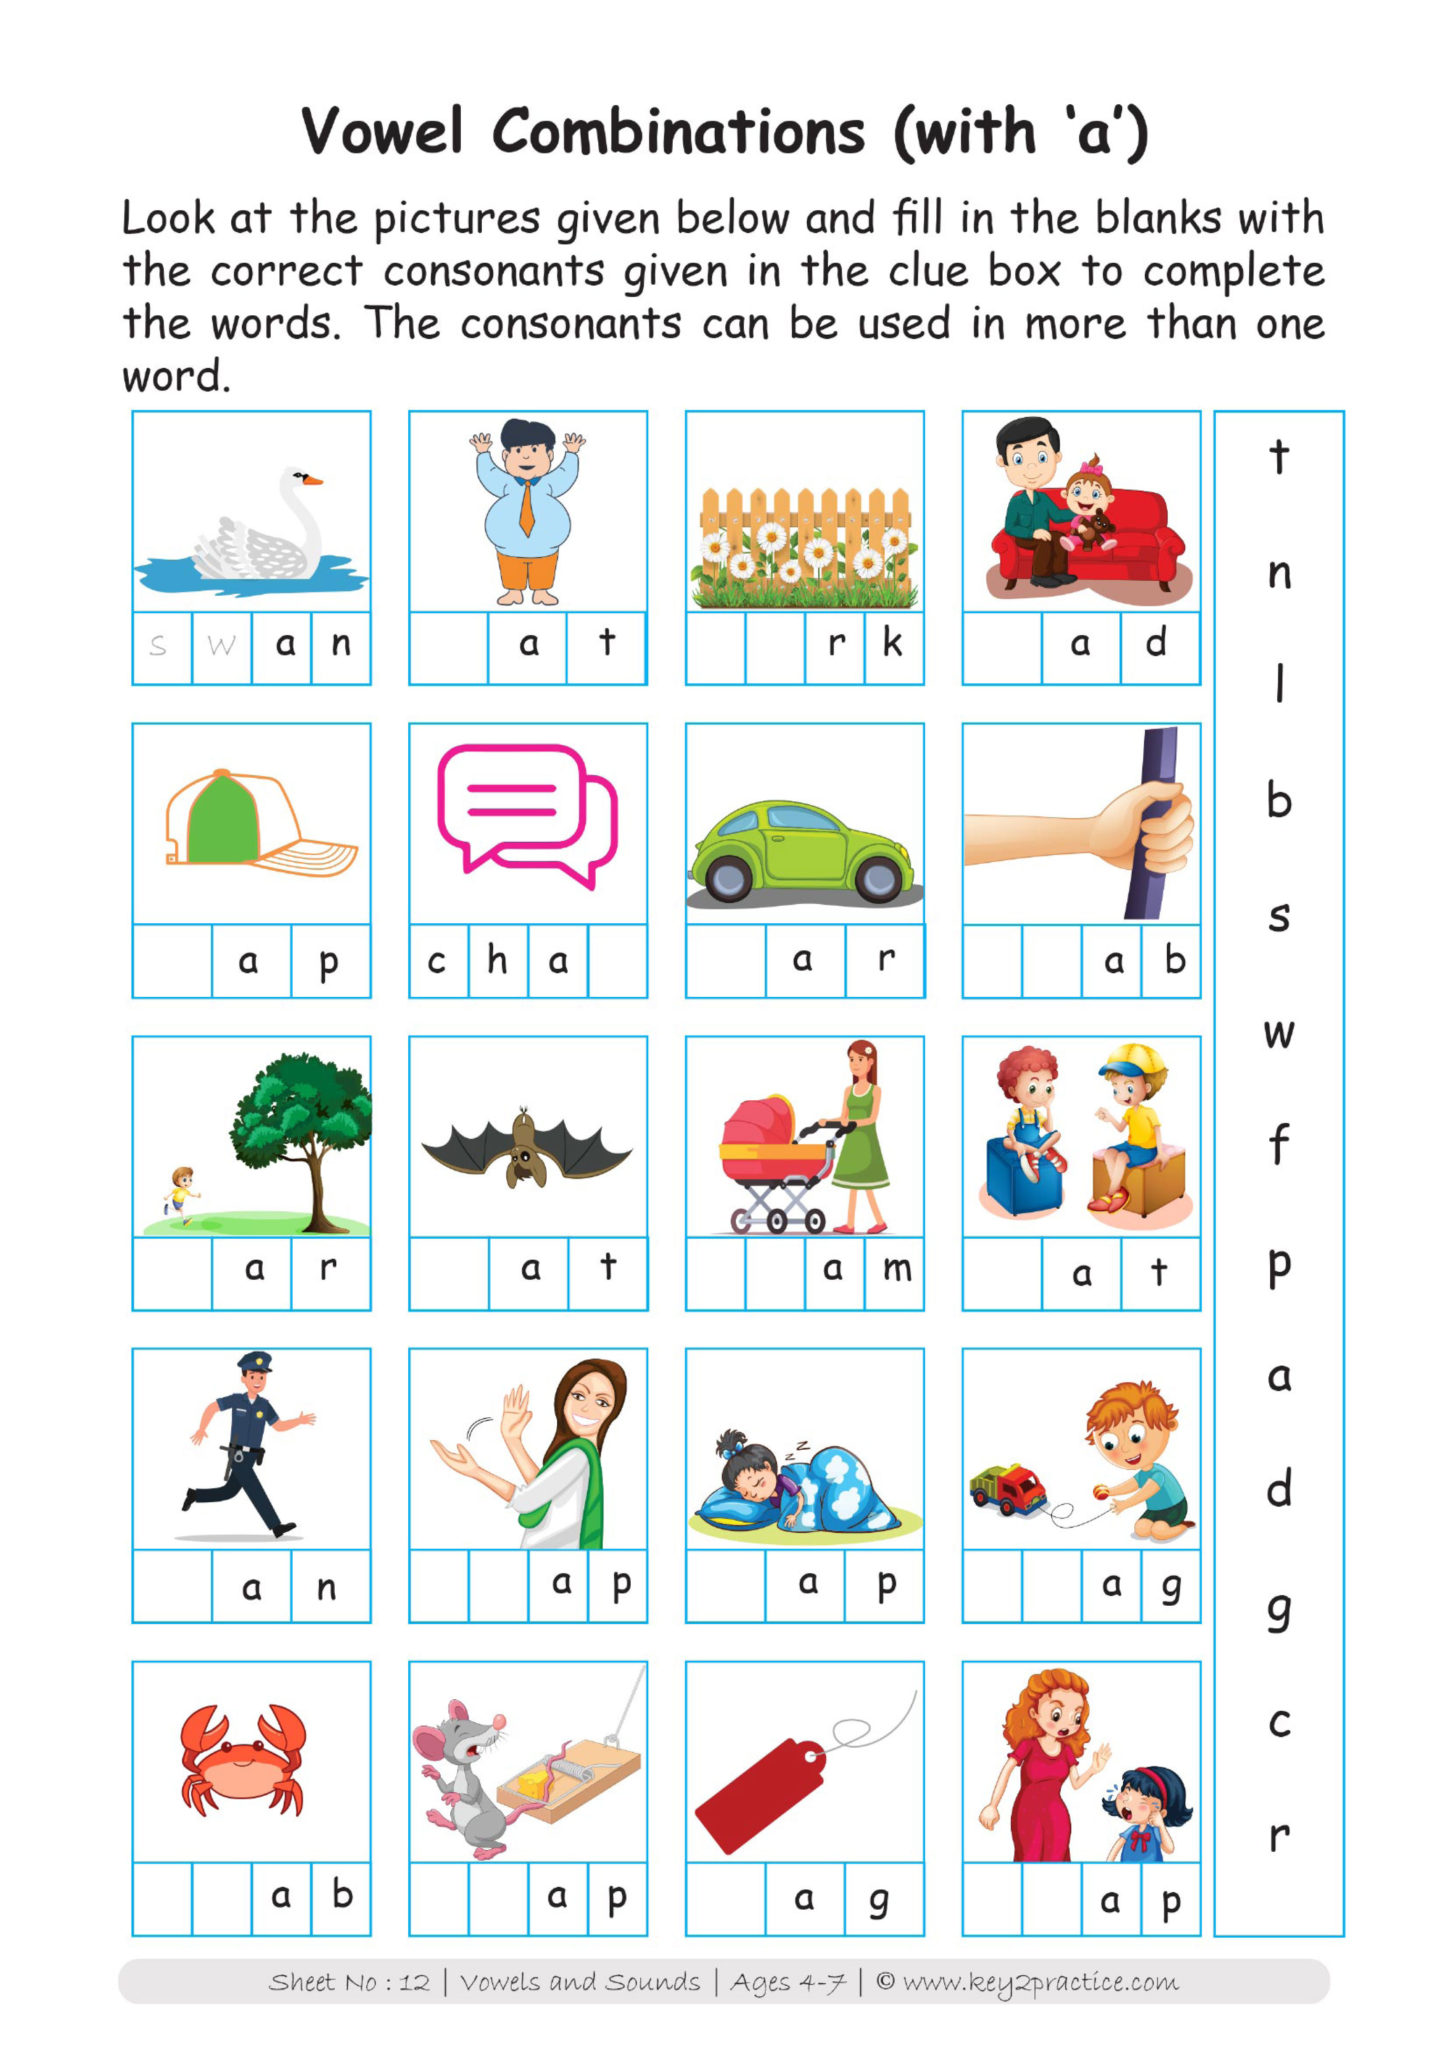 vowels-and-consonants-worksheets-i-pre-primary-classes-key2practice-vrogue